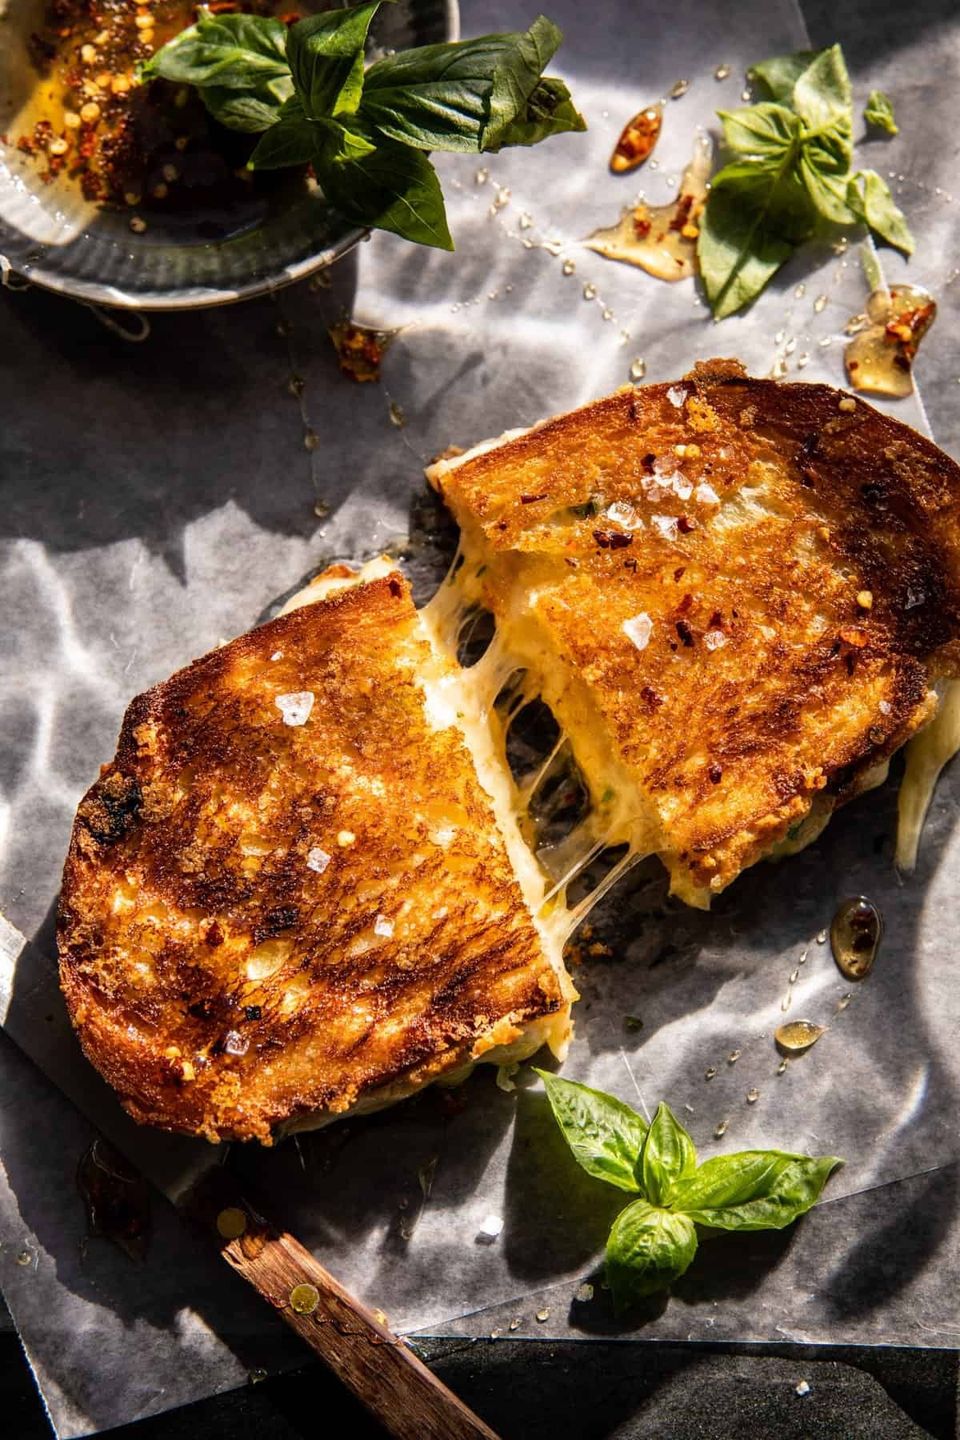 Miso Butter Grilled Cheese